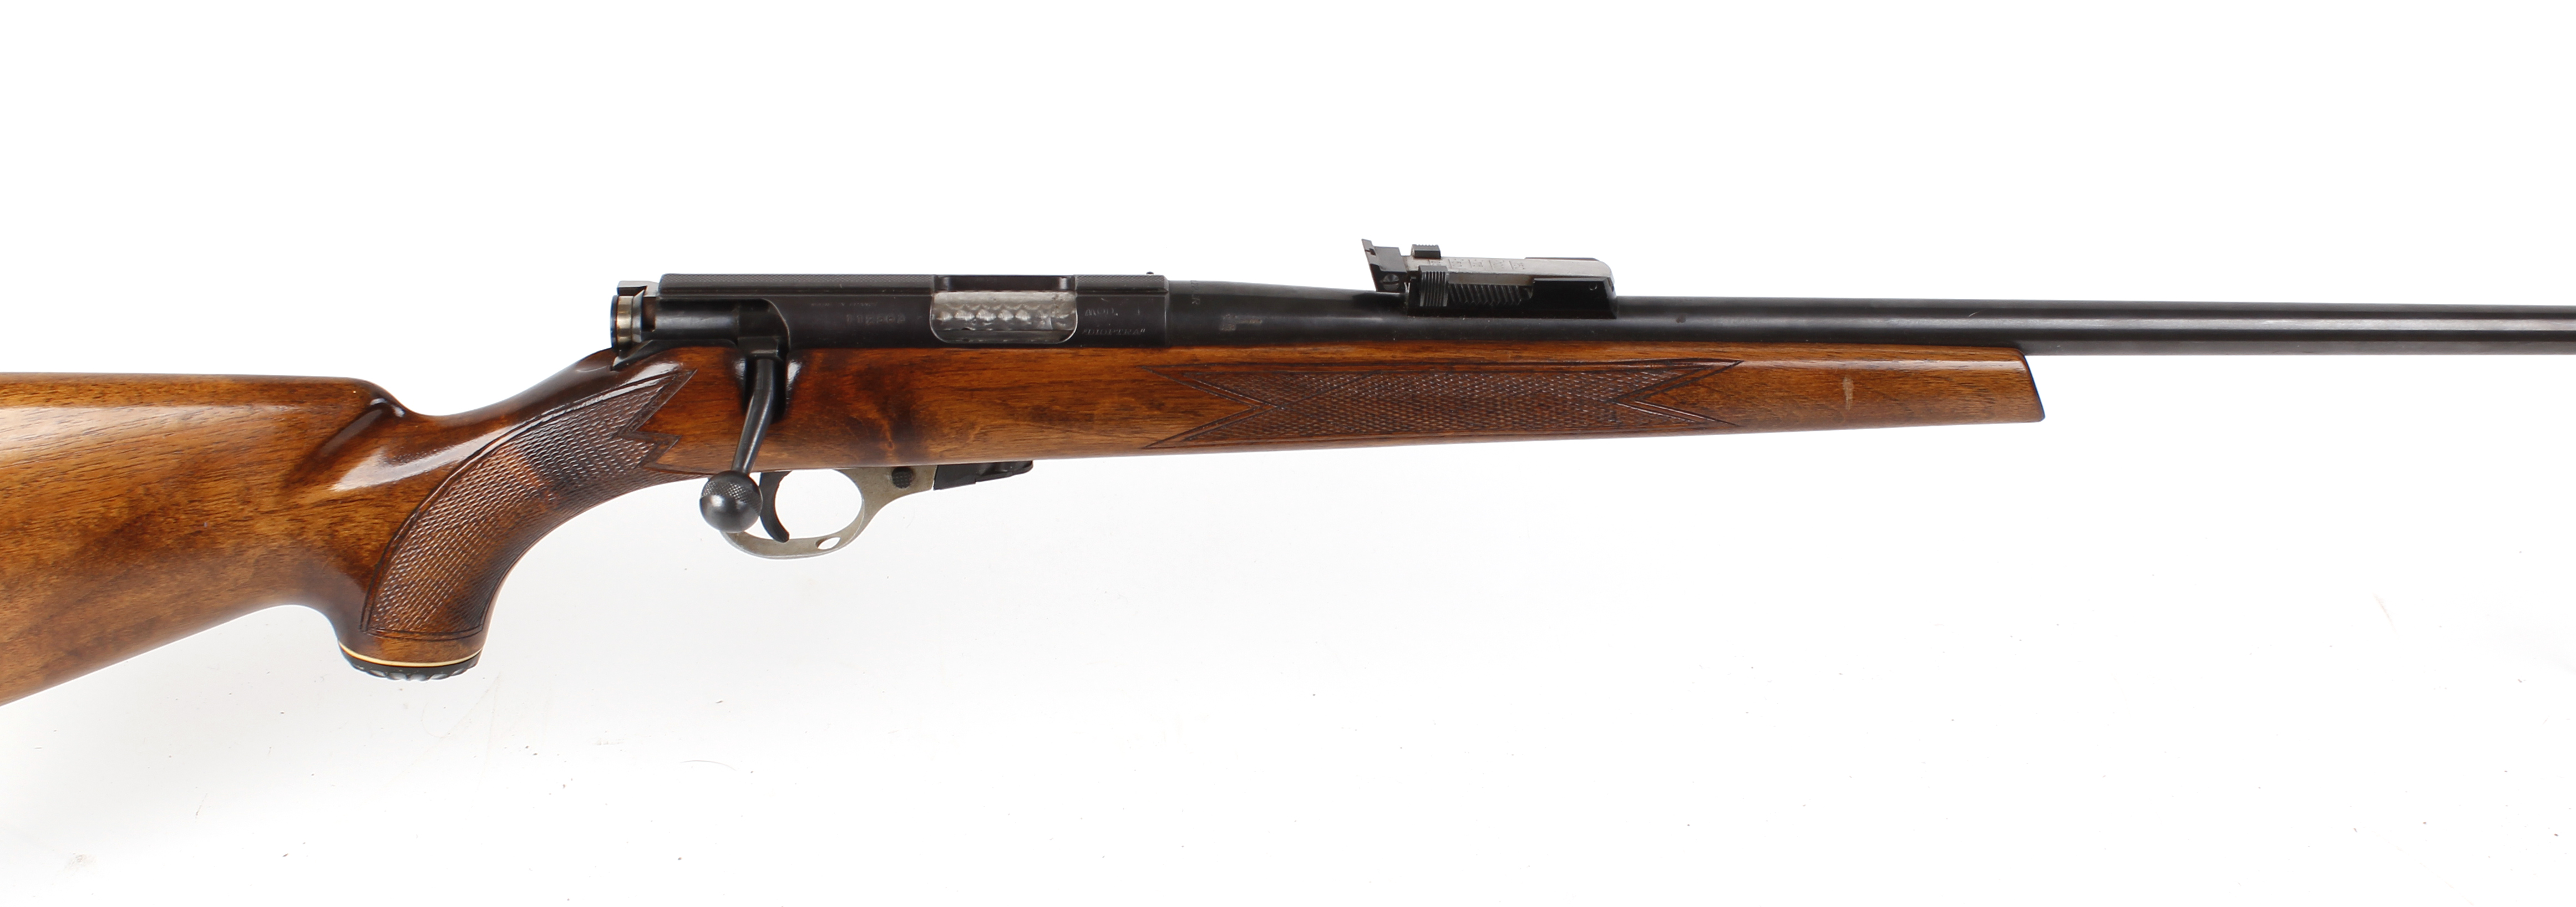 .22 Unique Model T Dioptra bolt action rifle, 23,1/2 ins threaded barrel with ramp rear sight, 5